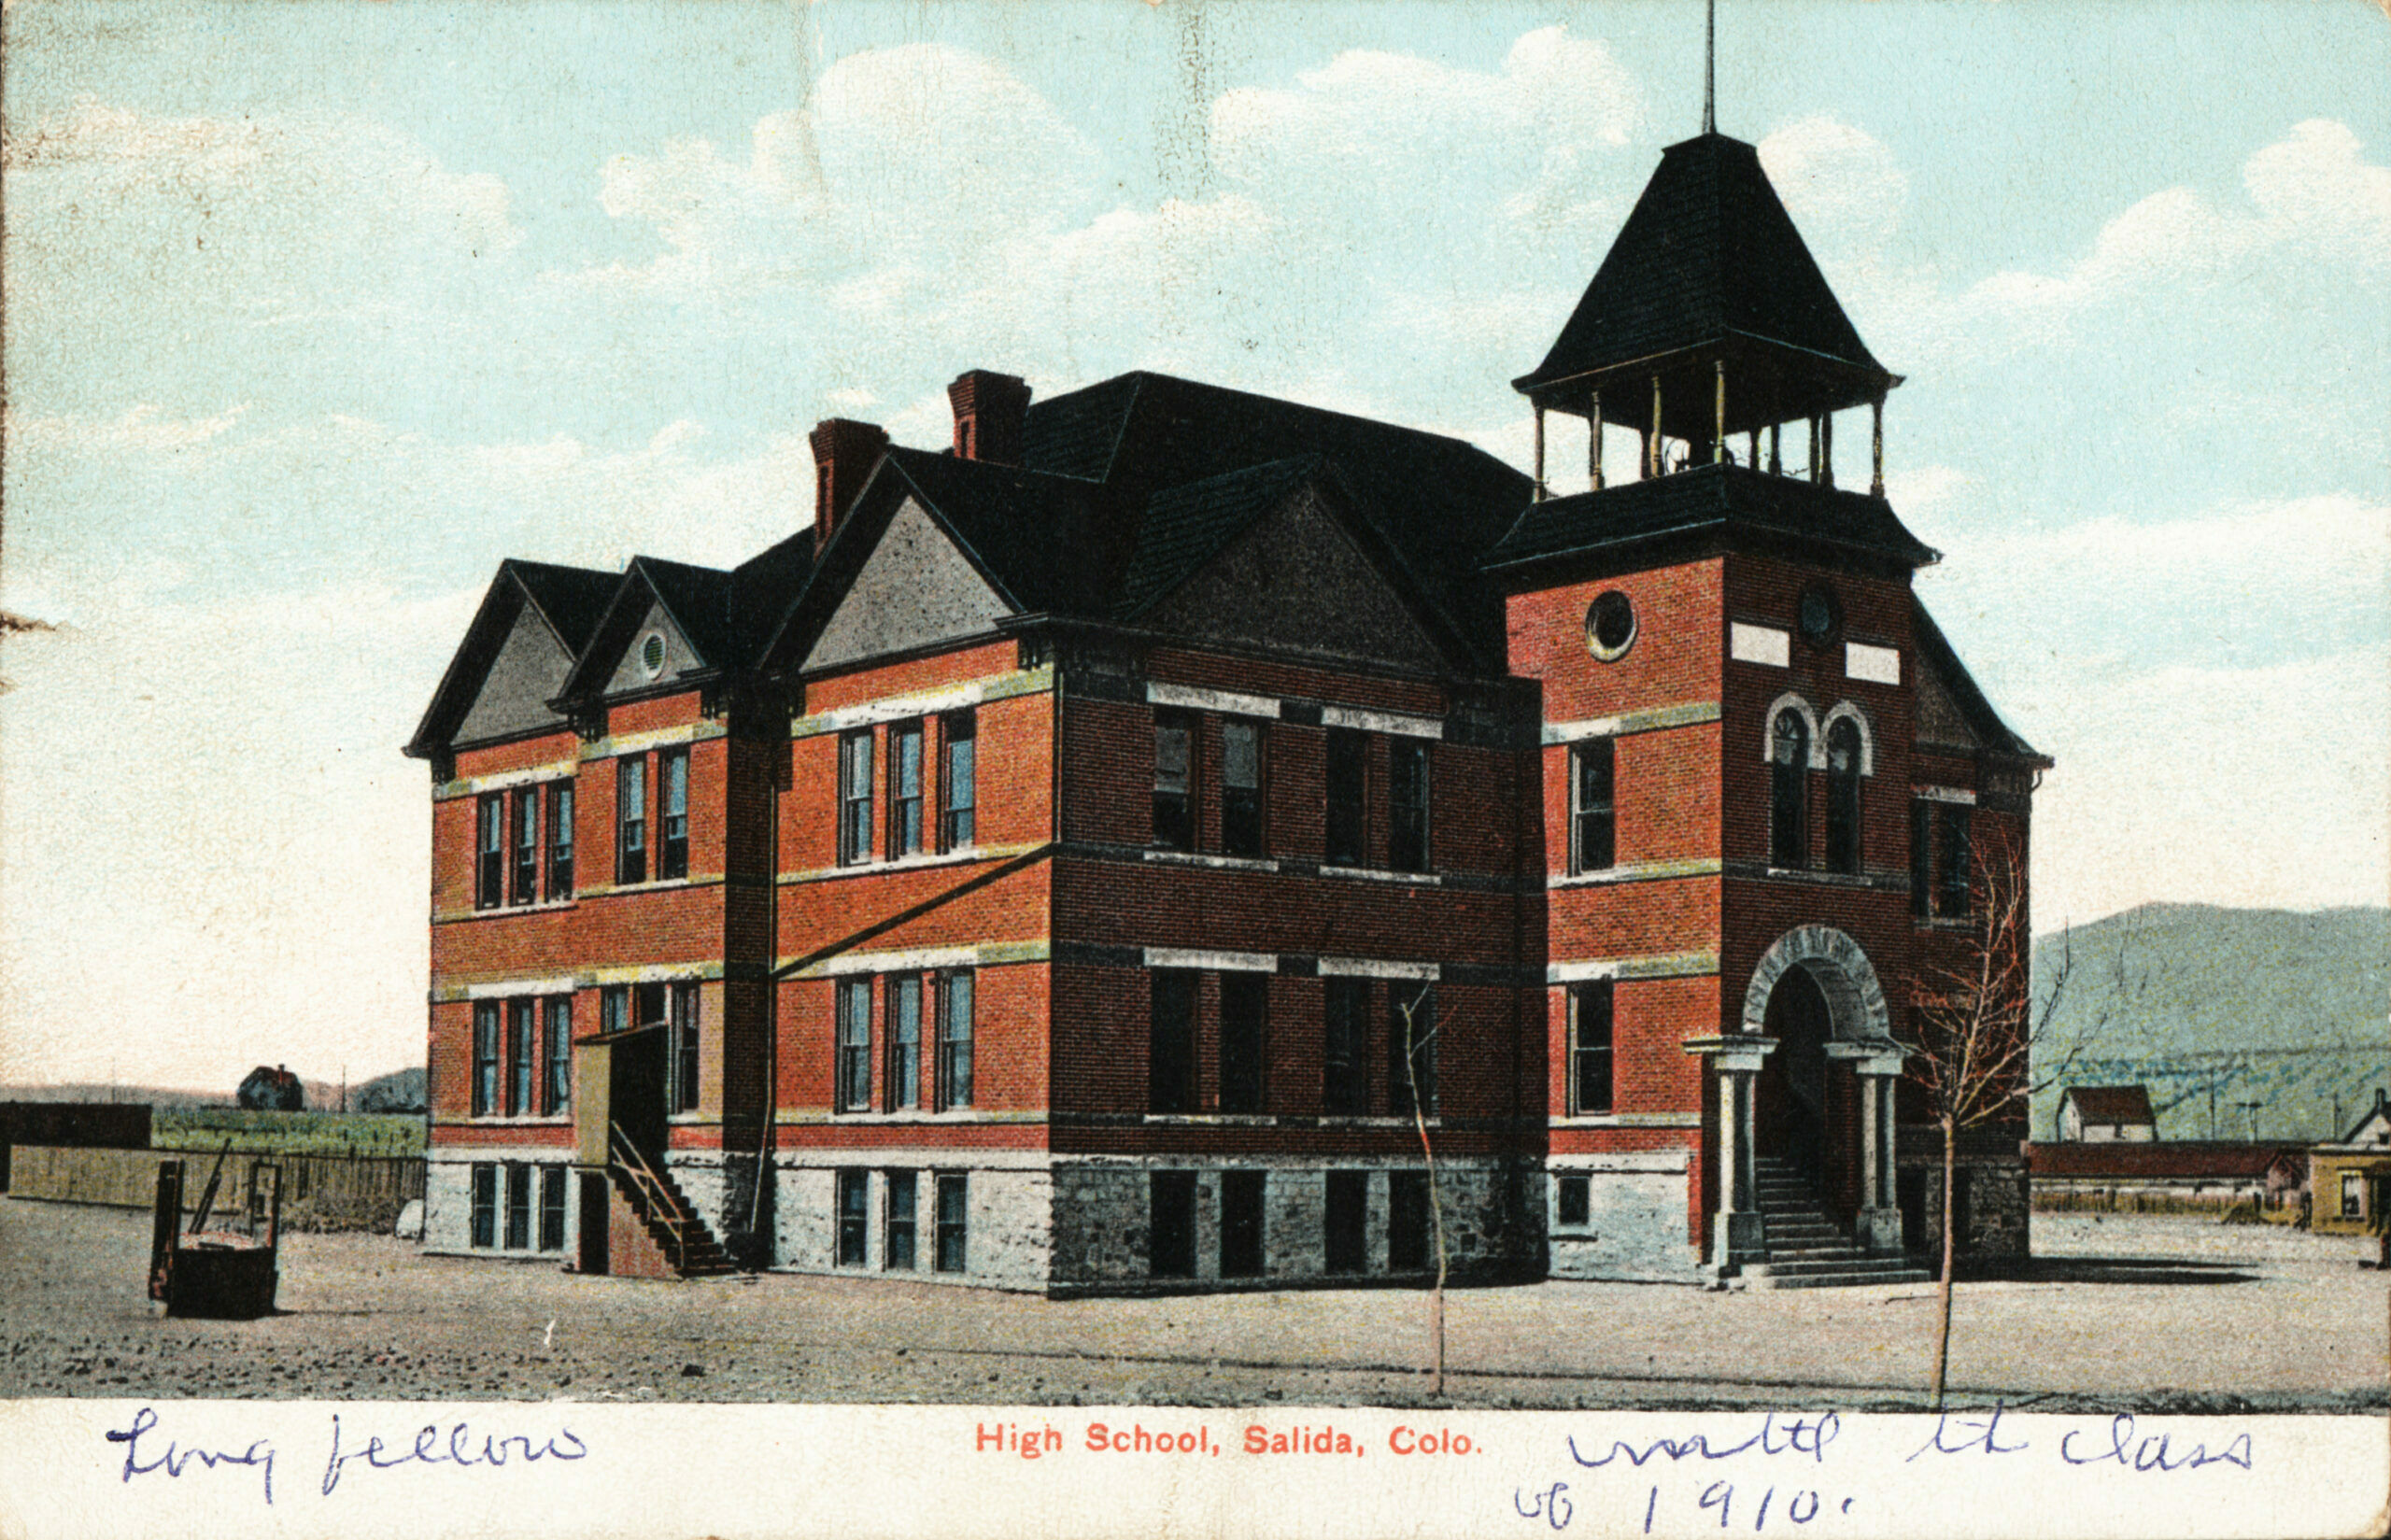 This is the H Street School, which was built in the western part of town between Seventh and Eighth streets. Completed in 1892, the $20,000 structure housed the Salida Public High School on the second floor until 1910. Elementary classrooms were located in the partial basement and on the first floor. In 1920, the school was renamed “Longfellow,” after the American poet. After the present elementary school was constructed in 1957, the historic Longfellow School was razed in 1966.  (2)